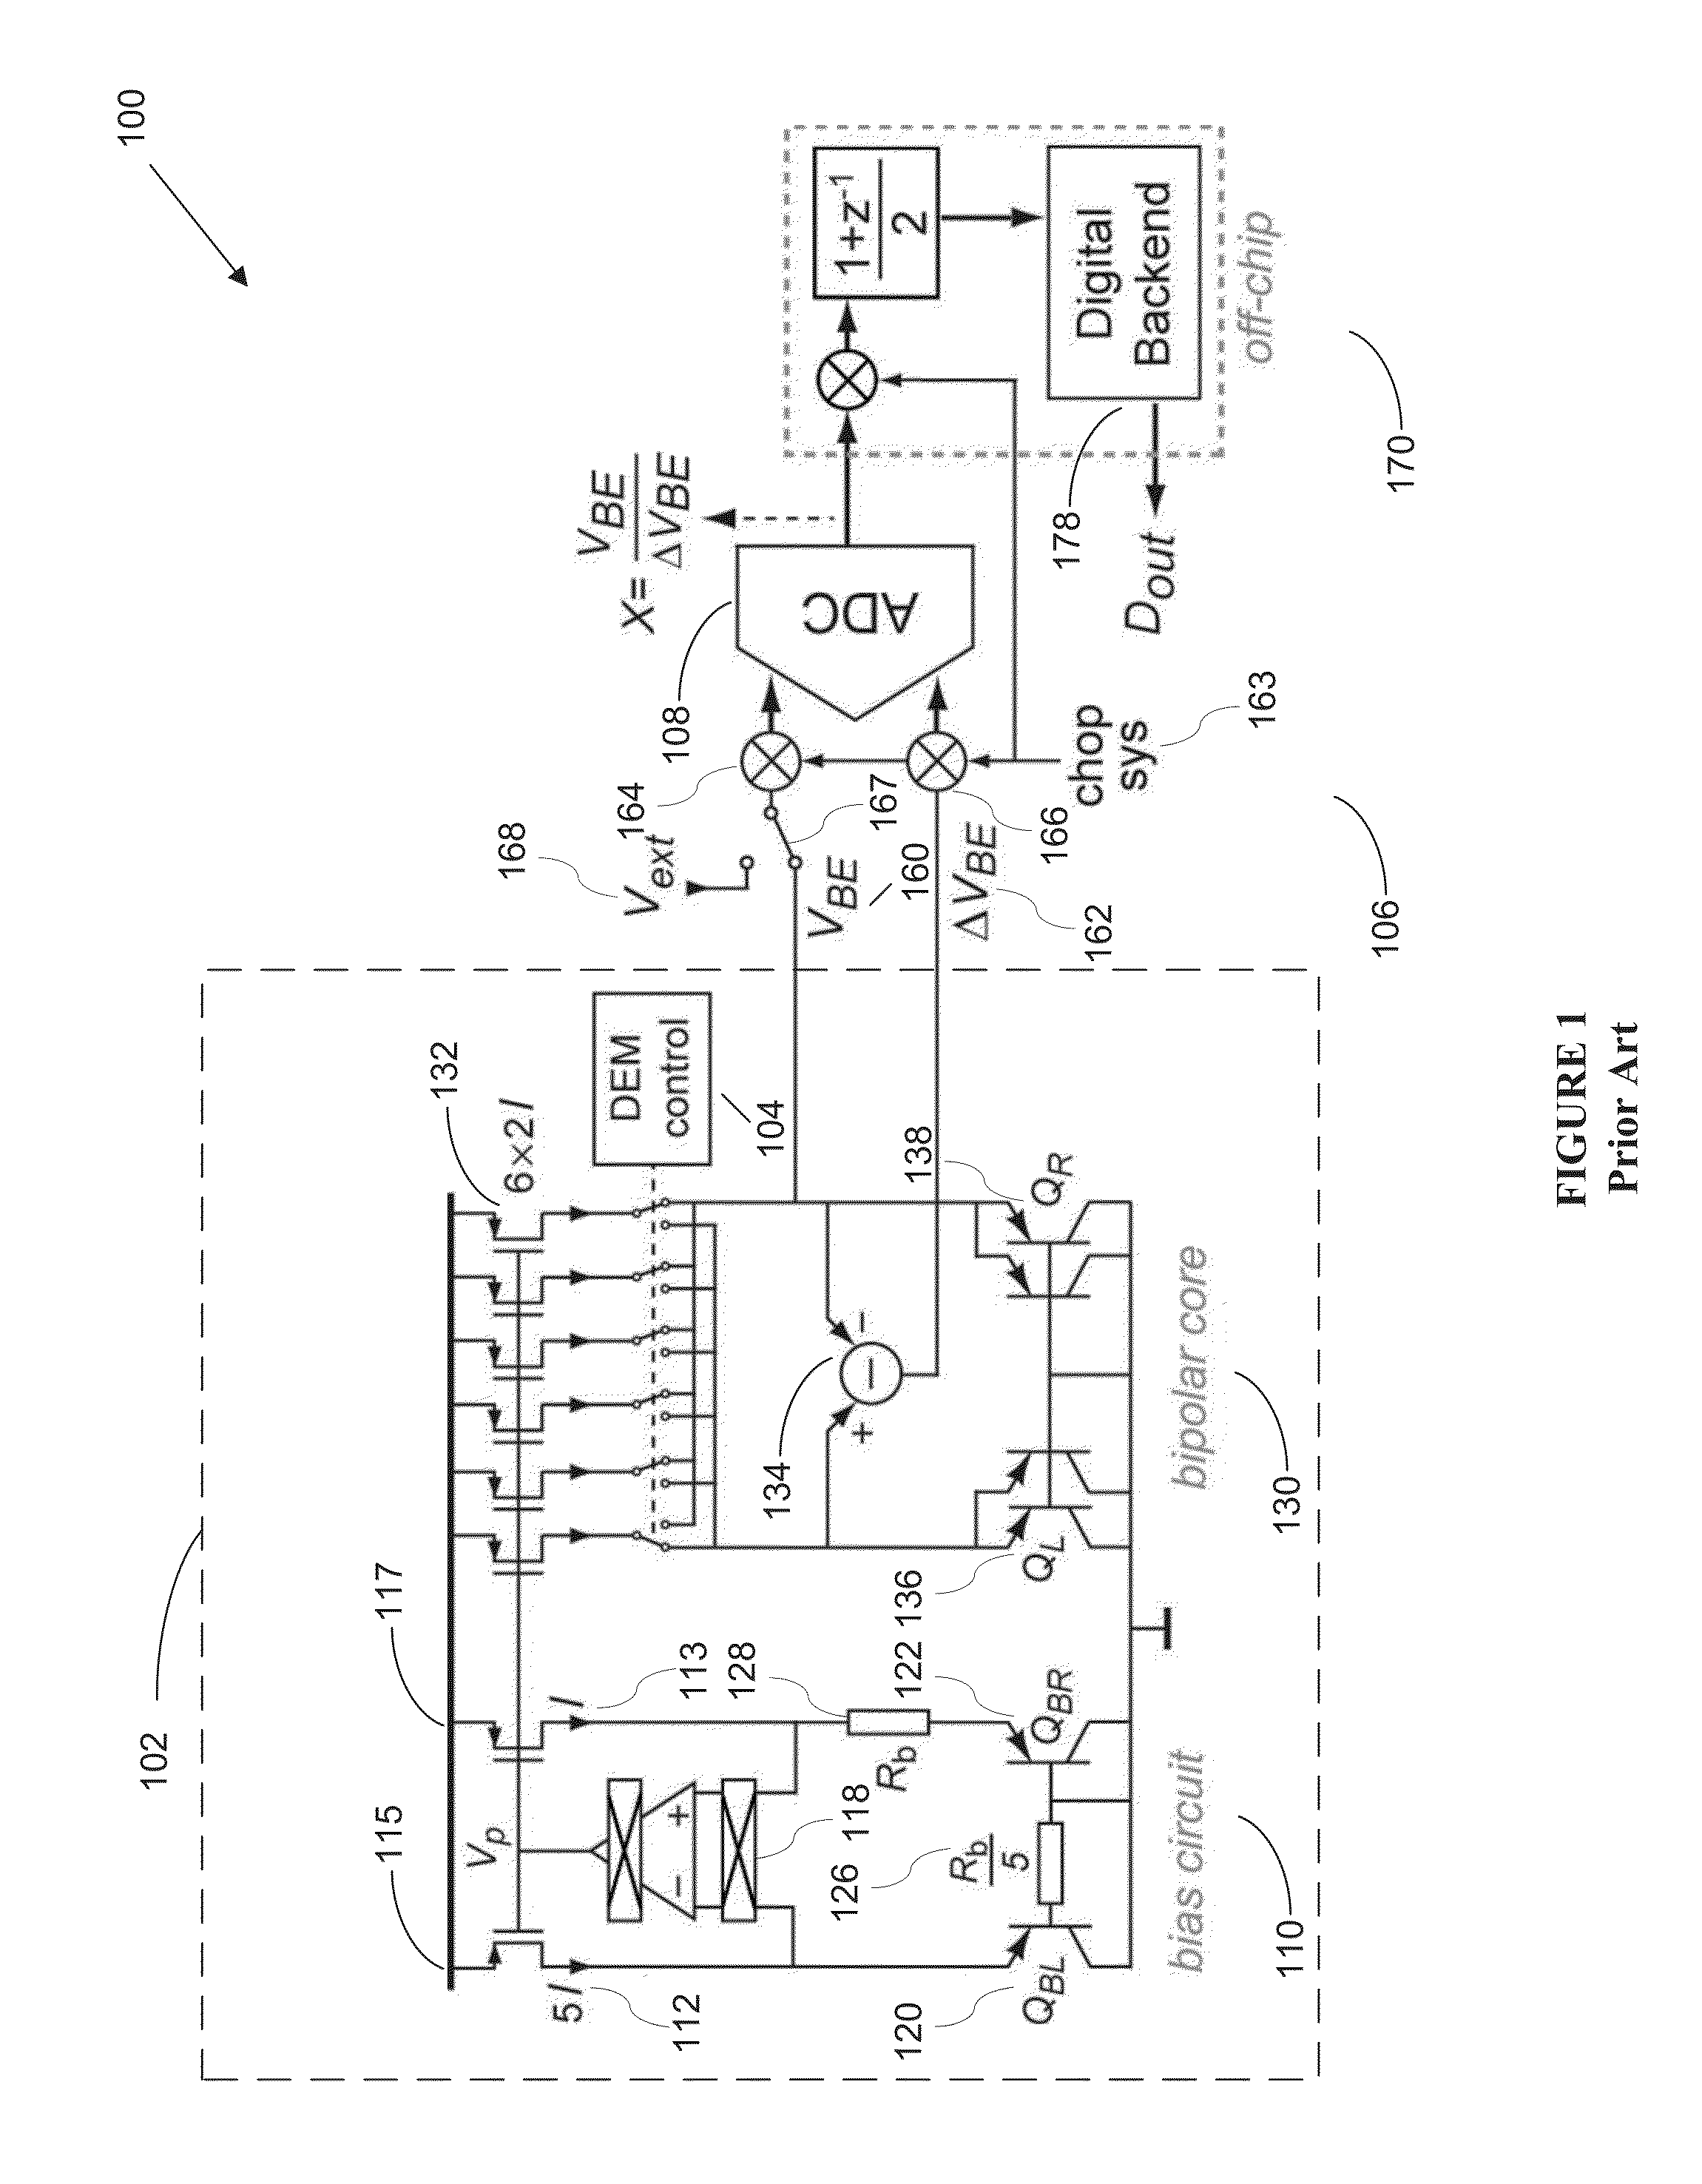 Systems and methods for on-chip temperature sensor